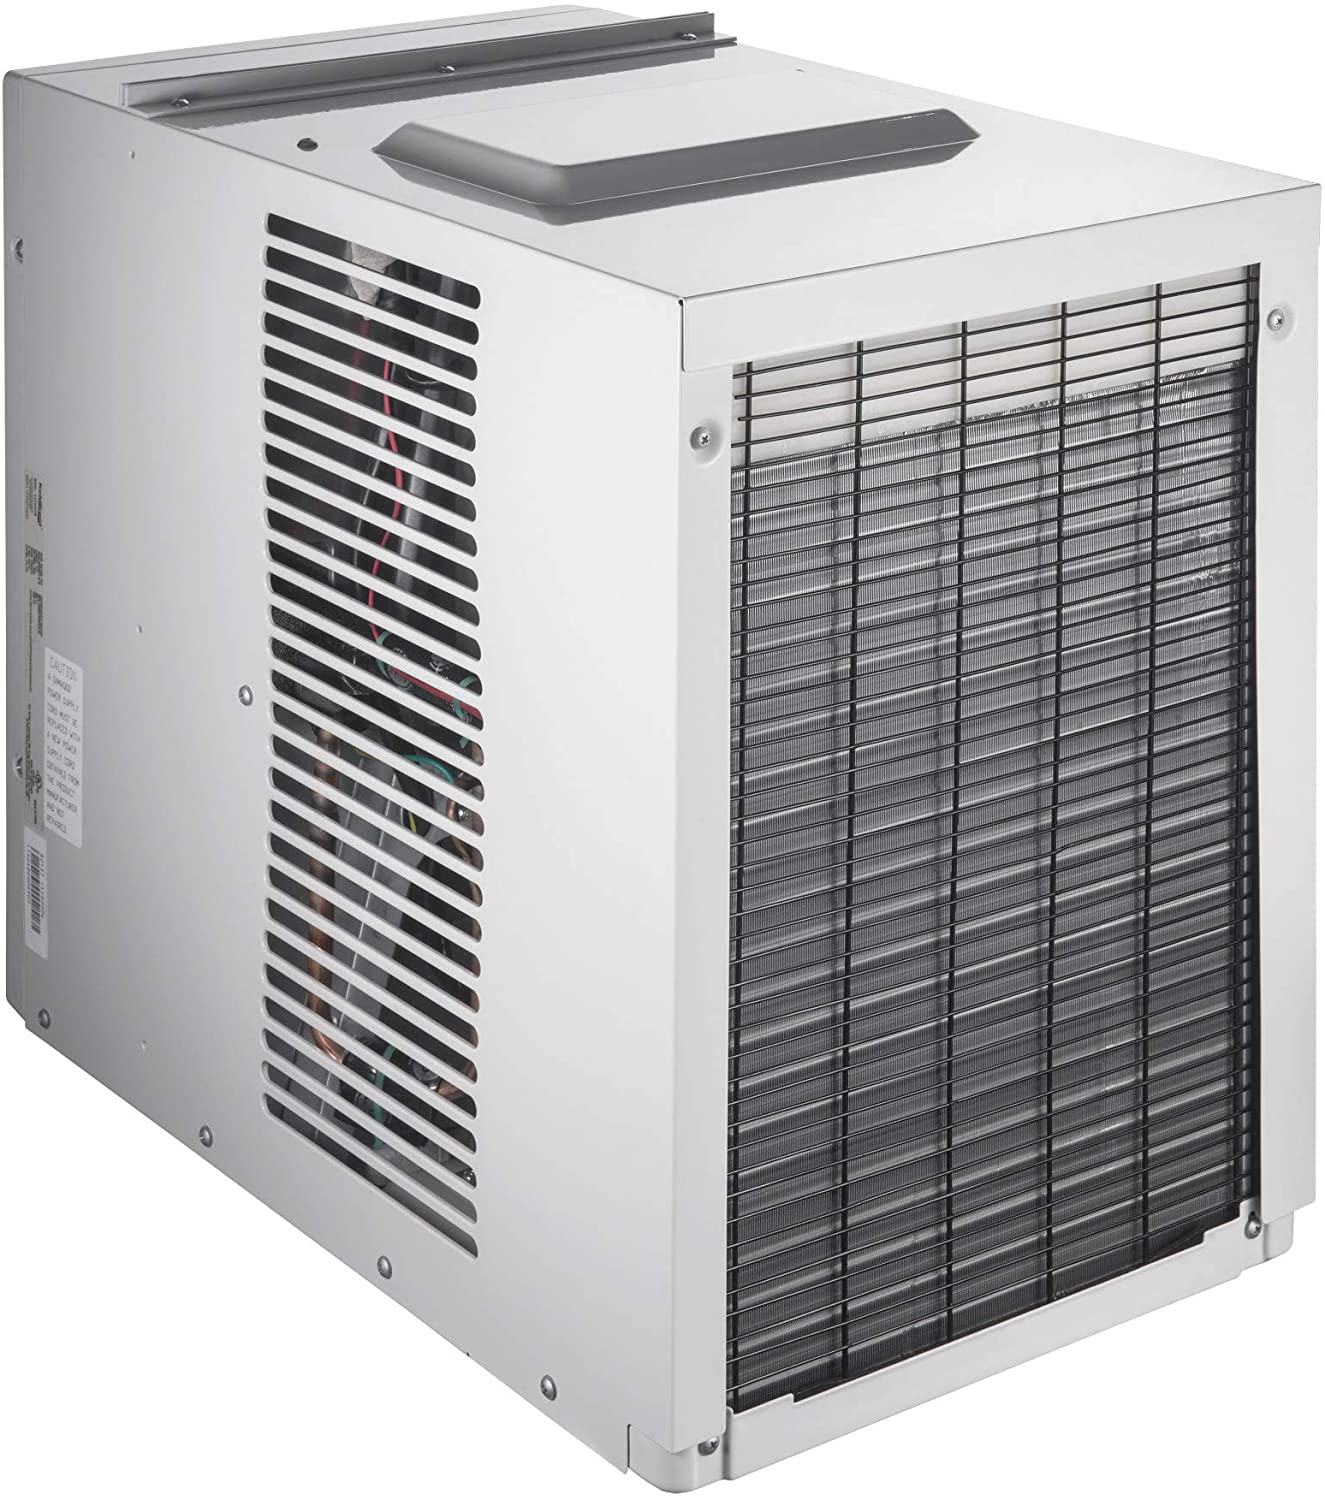 10 BEST CASEMENT/ VERTICAL WINDOW AIR CONDITIONER IN 2022 FOR SLIDING DOOR. All In One Cooling Gear Lab: Any Refrigerators Air Conditioners Freezers Ice Makers Coolers Fans Reviewed And Compared.